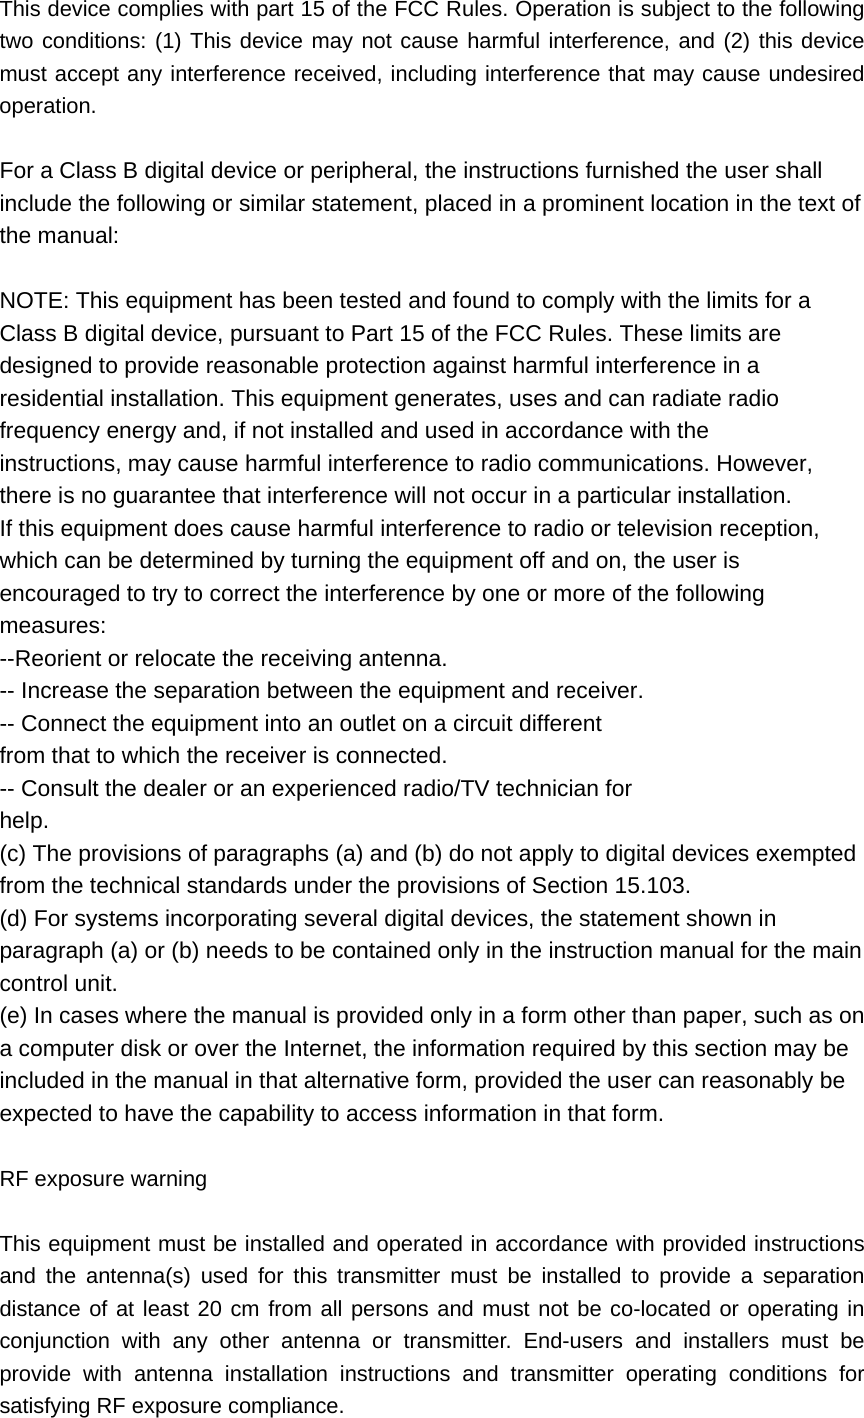 This device complies with part 15 of the FCC Rules. Operation is subject to the following two conditions: (1) This device may not cause harmful interference, and (2) this device must accept any interference received, including interference that may cause undesired operation.  For a Class B digital device or peripheral, the instructions furnished the user shall include the following or similar statement, placed in a prominent location in the text of the manual:    NOTE: This equipment has been tested and found to comply with the limits for a   Class B digital device, pursuant to Part 15 of the FCC Rules. These limits are   designed to provide reasonable protection against harmful interference in a   residential installation. This equipment generates, uses and can radiate radio   frequency energy and, if not installed and used in accordance with the   instructions, may cause harmful interference to radio communications. However,   there is no guarantee that interference will not occur in a particular installation.   If this equipment does cause harmful interference to radio or television reception,   which can be determined by turning the equipment off and on, the user is   encouraged to try to correct the interference by one or more of the following   measures:  --Reorient or relocate the receiving antenna.   -- Increase the separation between the equipment and receiver.   -- Connect the equipment into an outlet on a circuit different   from that to which the receiver is connected.   -- Consult the dealer or an experienced radio/TV technician for   help.  (c) The provisions of paragraphs (a) and (b) do not apply to digital devices exempted from the technical standards under the provisions of Section 15.103.   (d) For systems incorporating several digital devices, the statement shown in paragraph (a) or (b) needs to be contained only in the instruction manual for the main control unit.   (e) In cases where the manual is provided only in a form other than paper, such as on a computer disk or over the Internet, the information required by this section may be included in the manual in that alternative form, provided the user can reasonably be expected to have the capability to access information in that form.    RF exposure warning    This equipment must be installed and operated in accordance with provided instructions and the antenna(s) used for this transmitter must be installed to provide a separation distance of at least 20 cm from all persons and must not be co-located or operating in conjunction with any other antenna or transmitter. End-users and installers must be provide with antenna installation instructions and transmitter operating conditions for satisfying RF exposure compliance. 